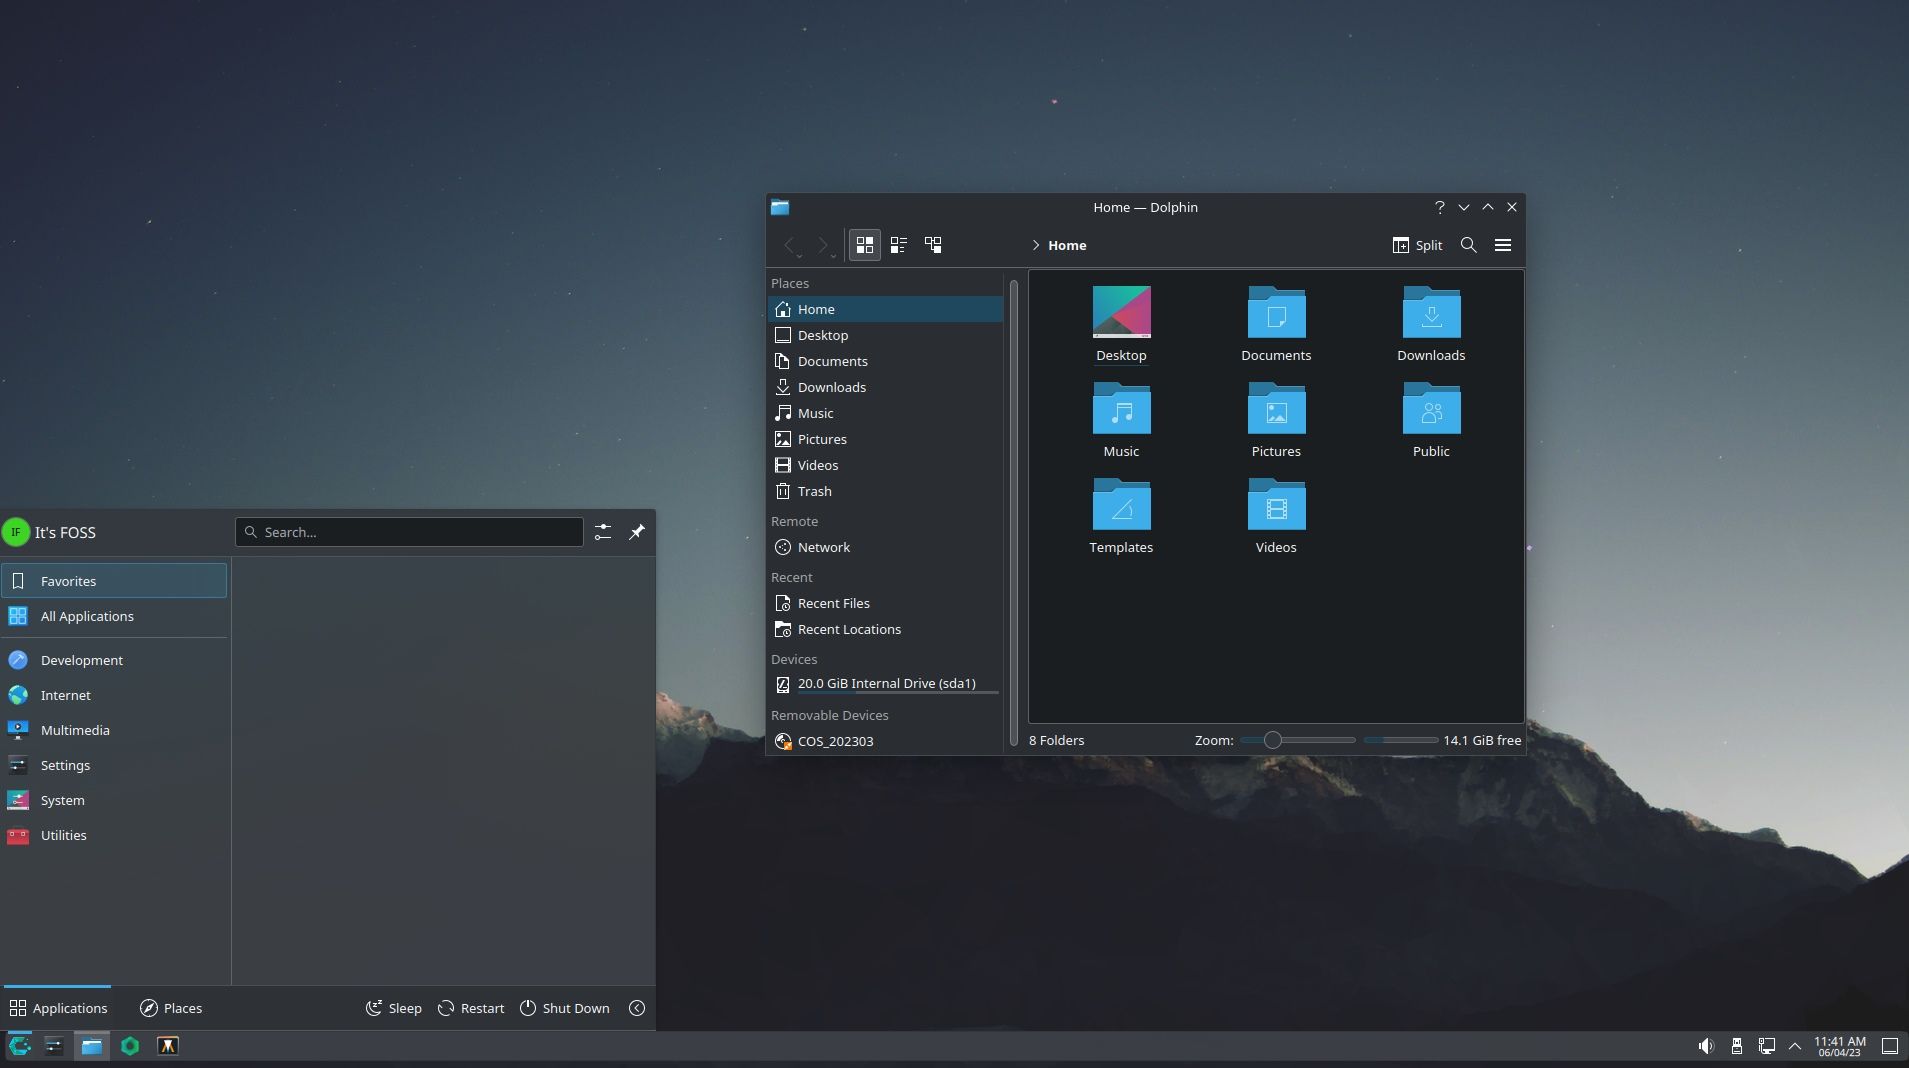 cachyos homescreen with file manager using kde breeze dark theme